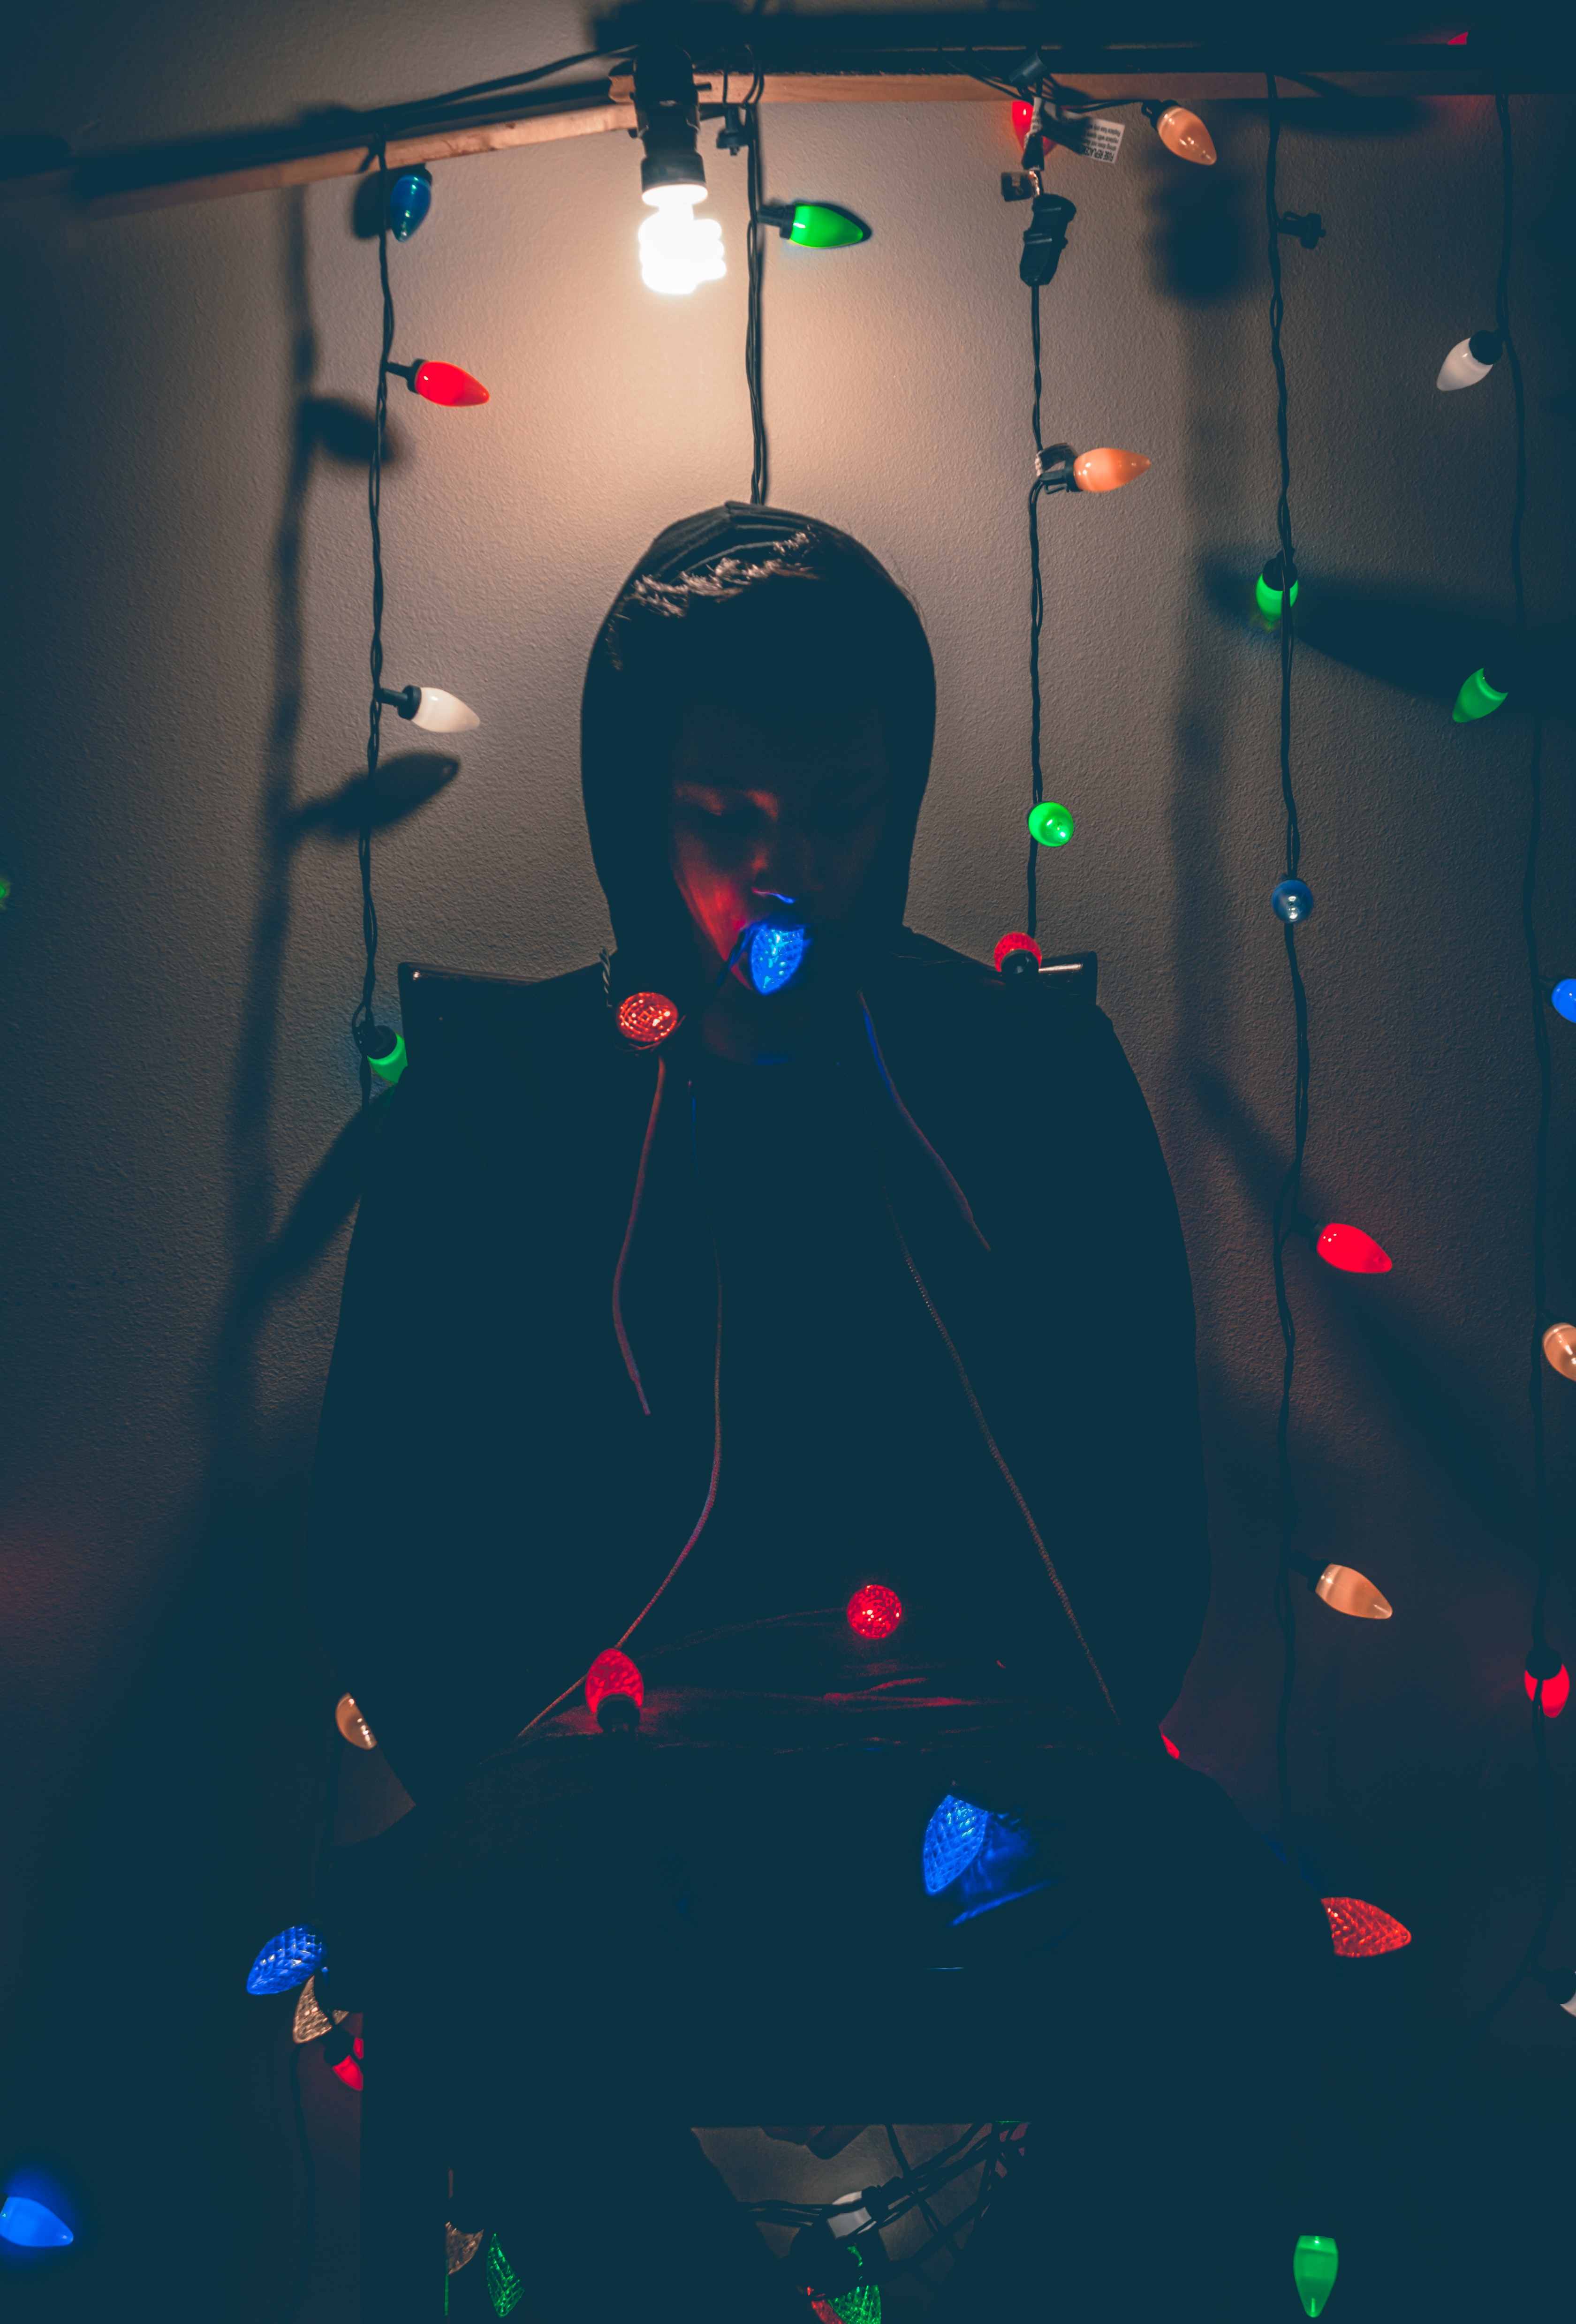 Man sitting on chair with multi-colored string lights photo